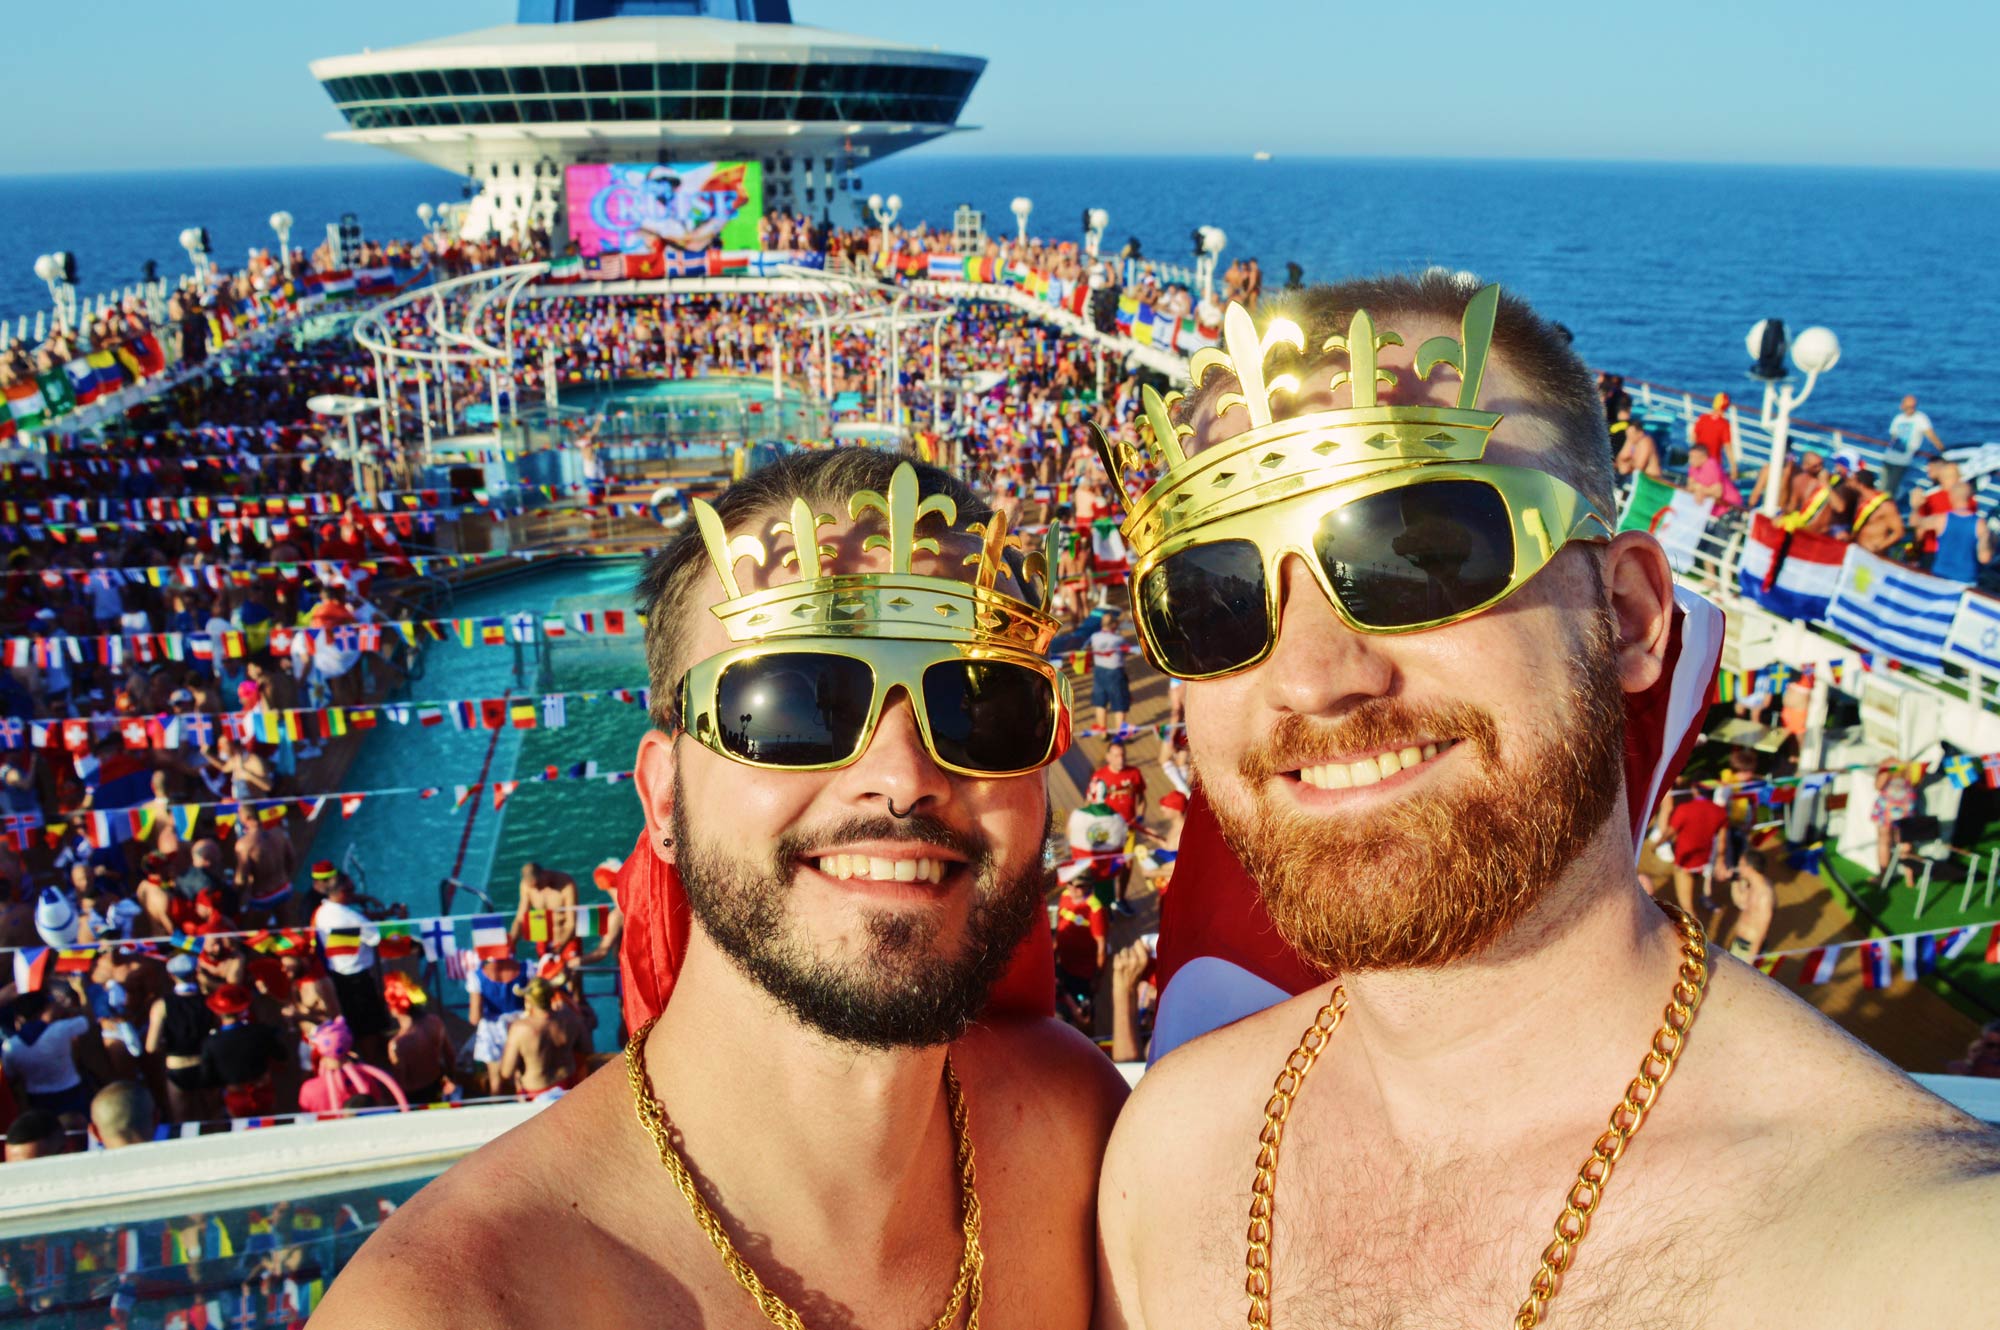 Great News! We will attend The (Gay) Cruise 2017 by La Demence!